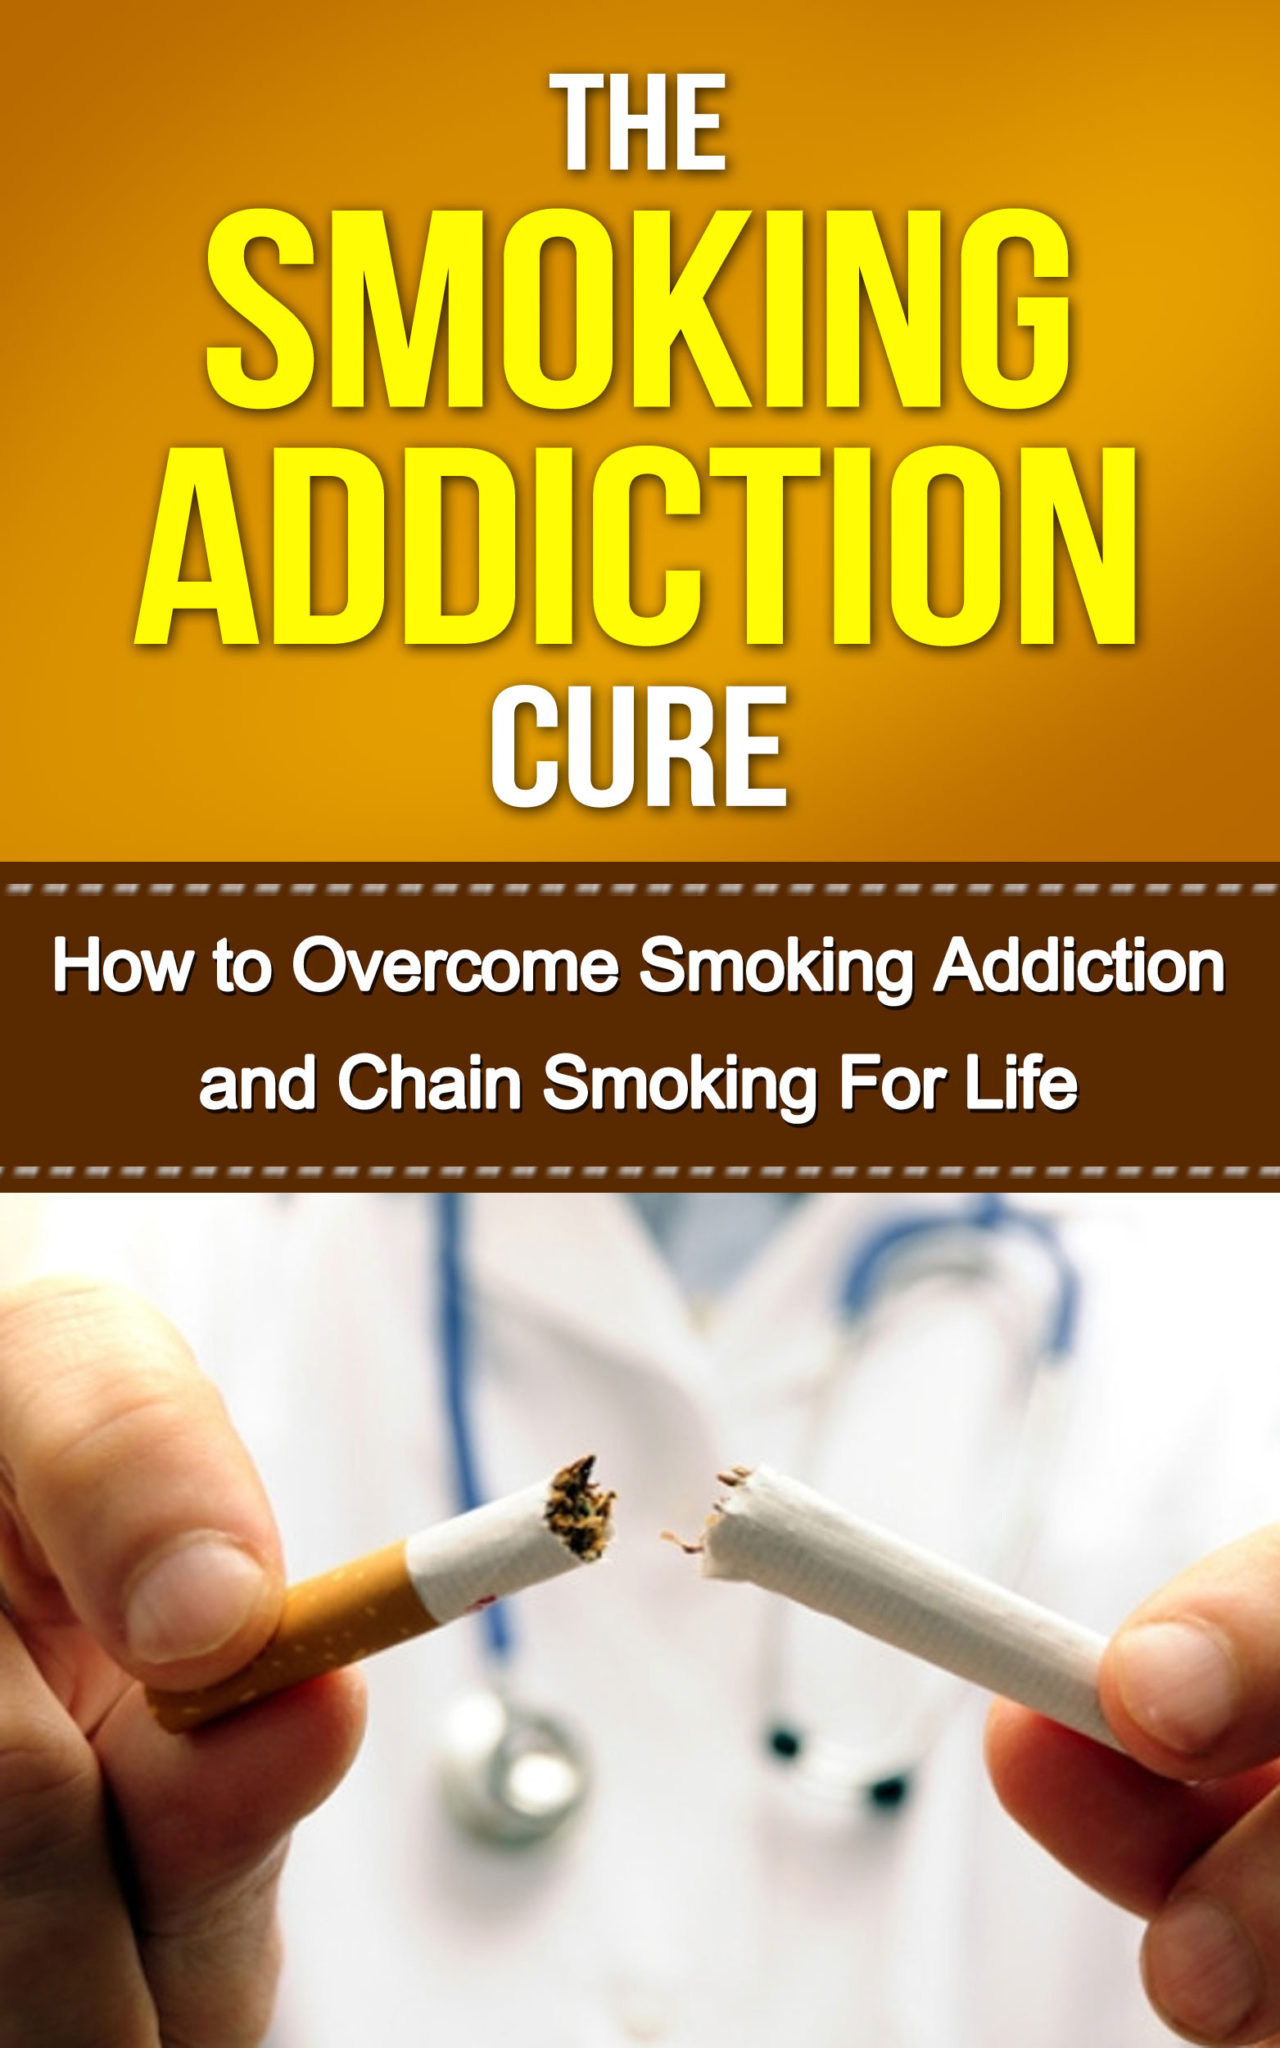 The Smoking Addiction Cure: How to Overcome Smoking Addiction and Chain Smoking For Life by Tony Smith